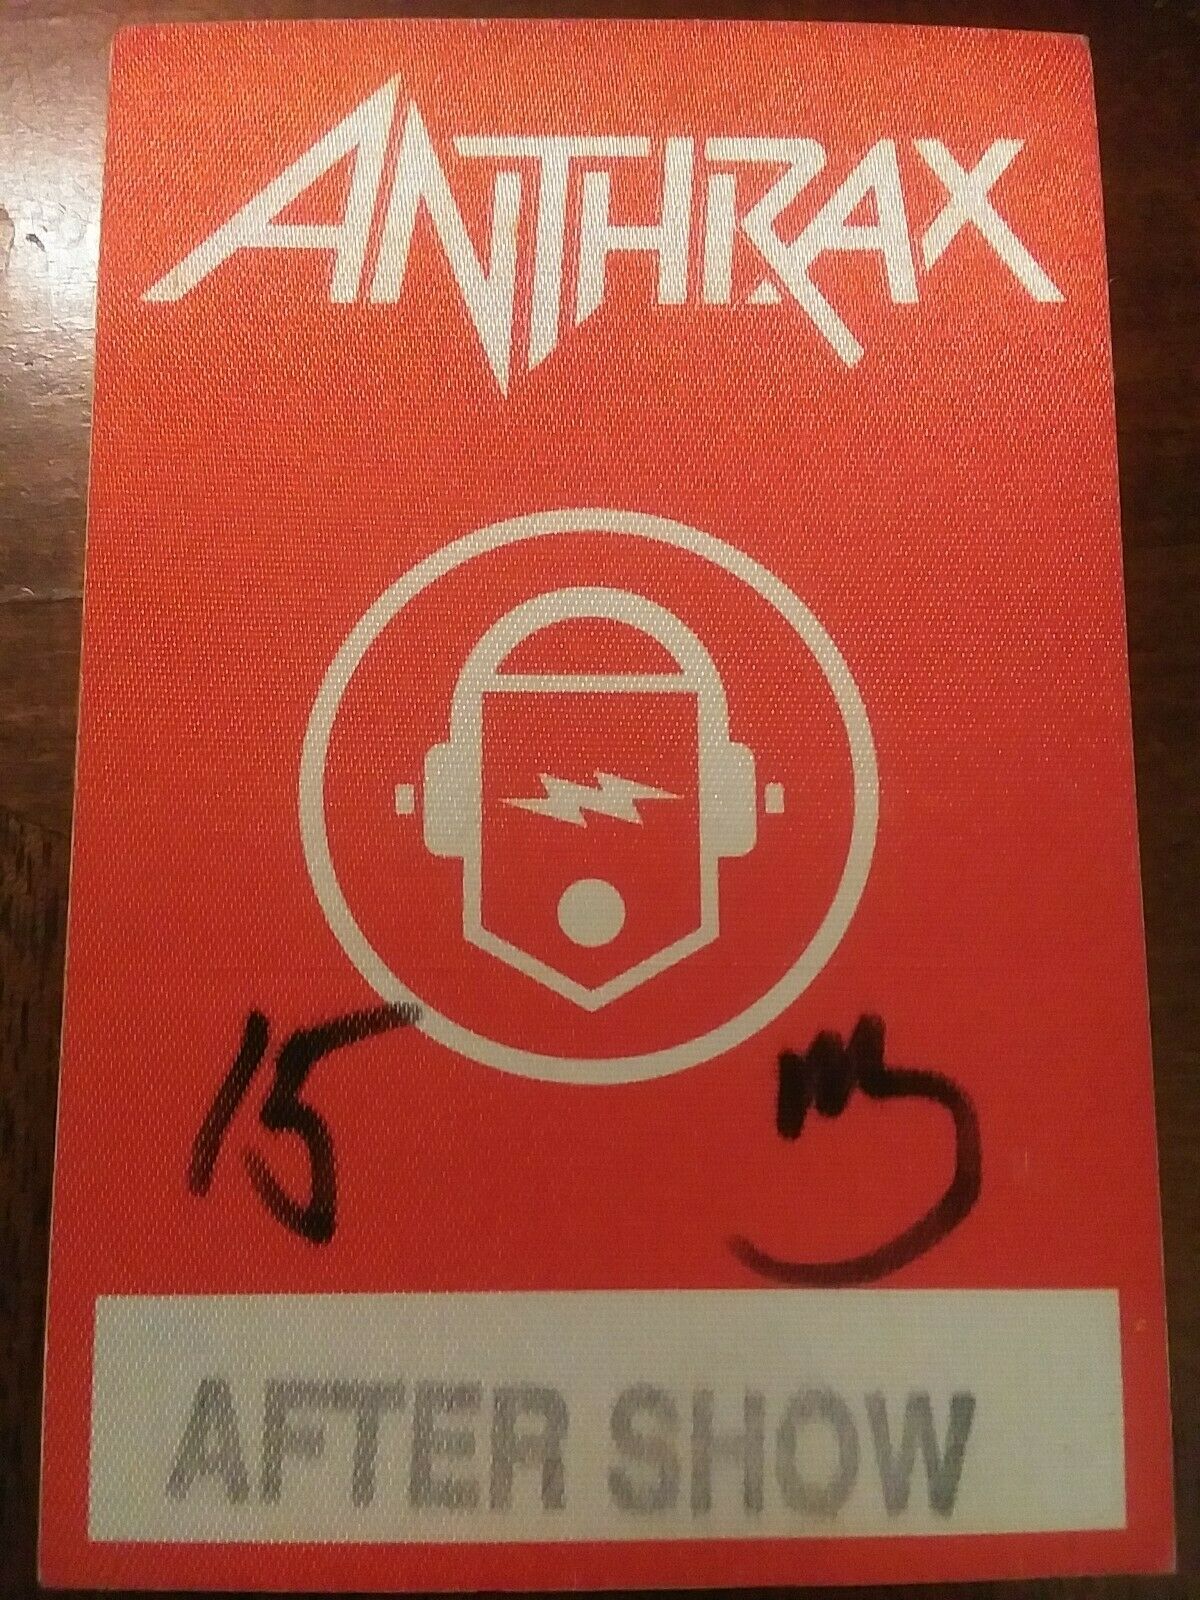 ANTHRAX 1993 Sound Of White Noise Tour Backstage Pass VIP AFTERSHOW CONCERT